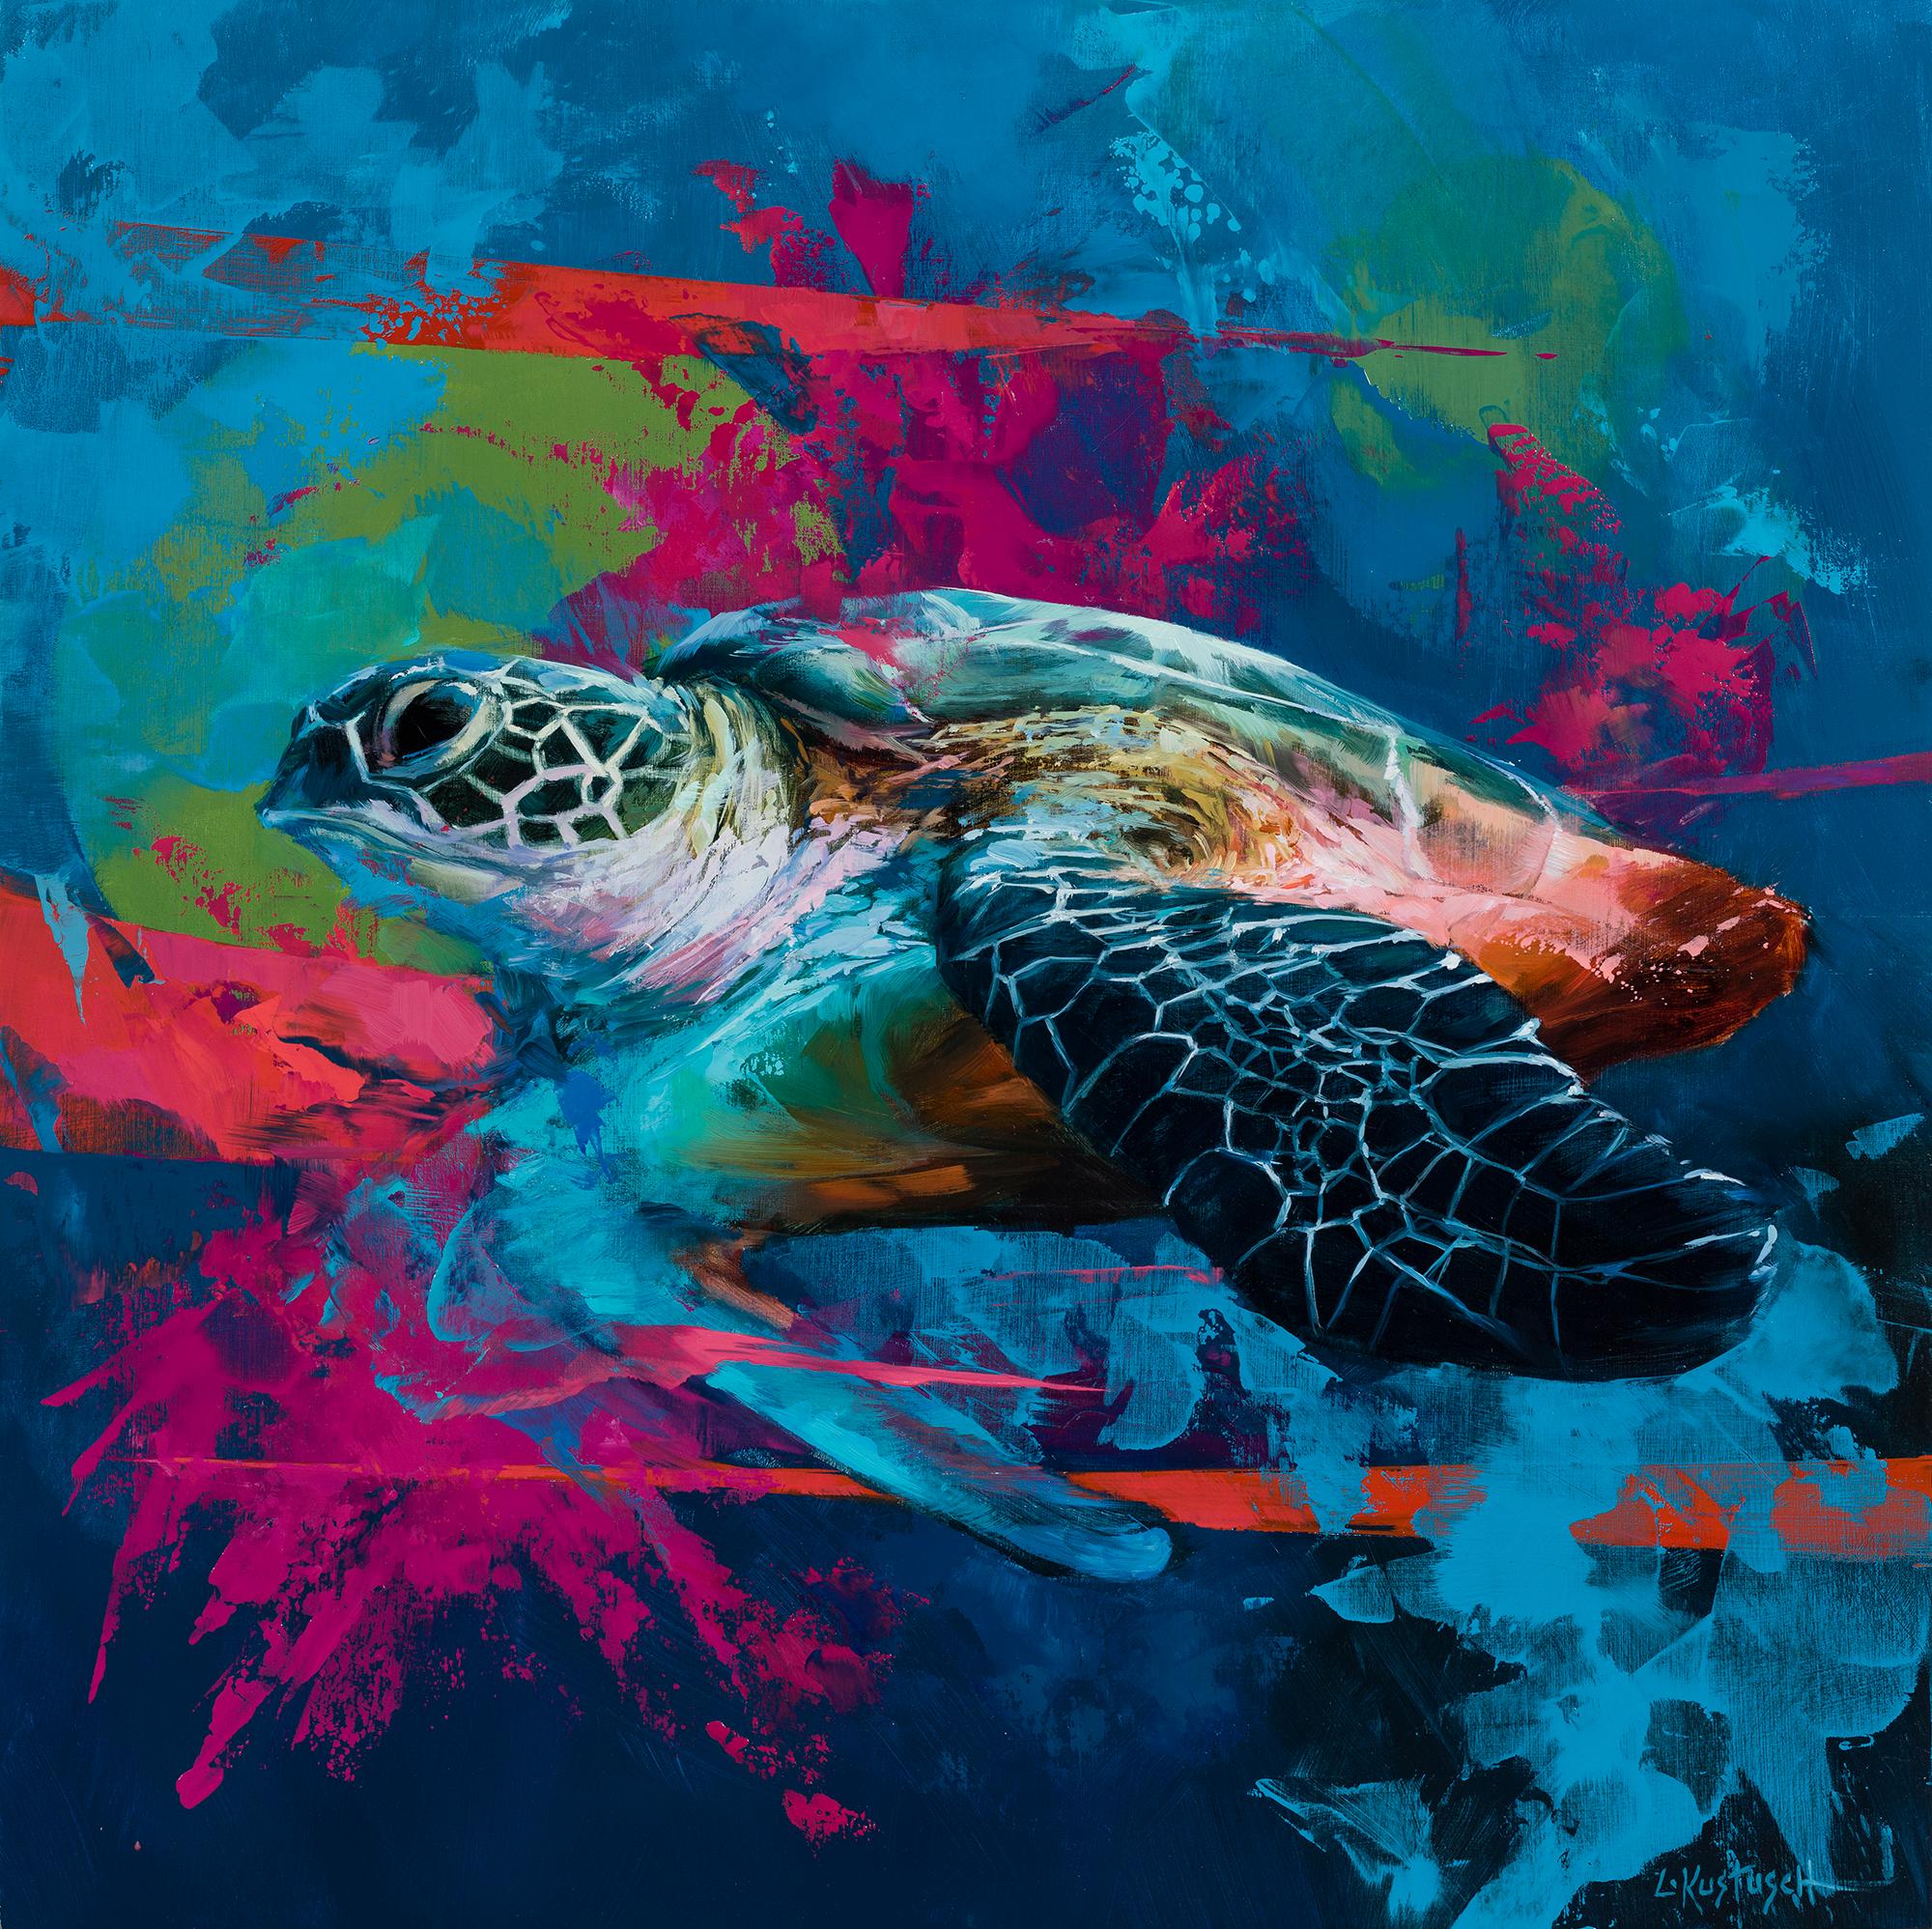 Lindsey Kustusch Figurative Painting - "The Green Sea Turtle" Animal Themed Oil Painting